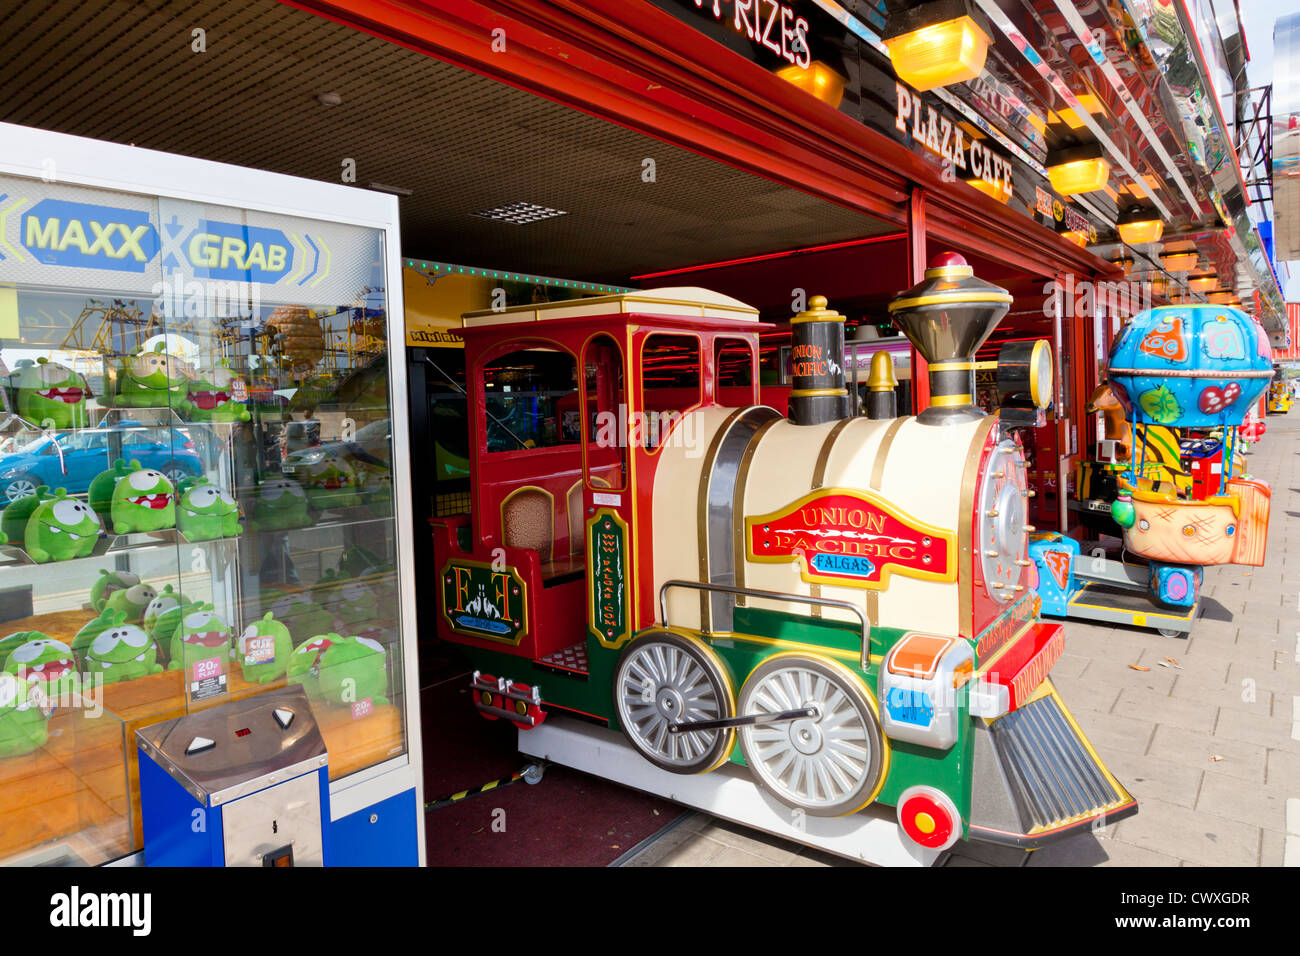 Amusement arcade on Skegness seafront, Lincolnshire, England, UK Stock Photo